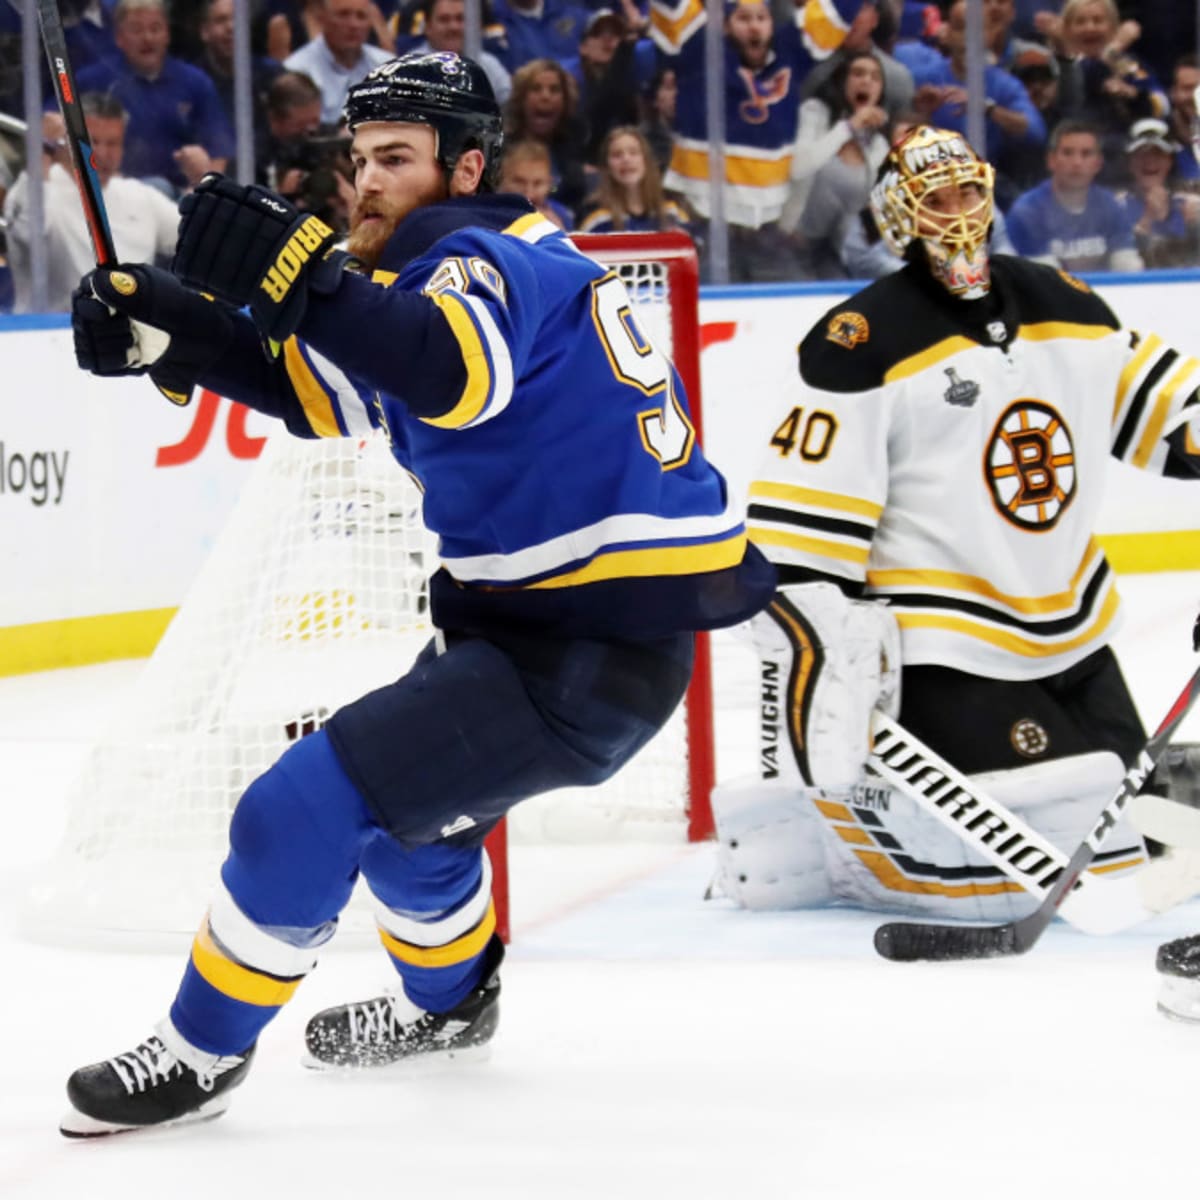 Bruins defeat Devils, tie NHL single-season wins mark - The Rink Live   Comprehensive coverage of youth, junior, high school and college hockey